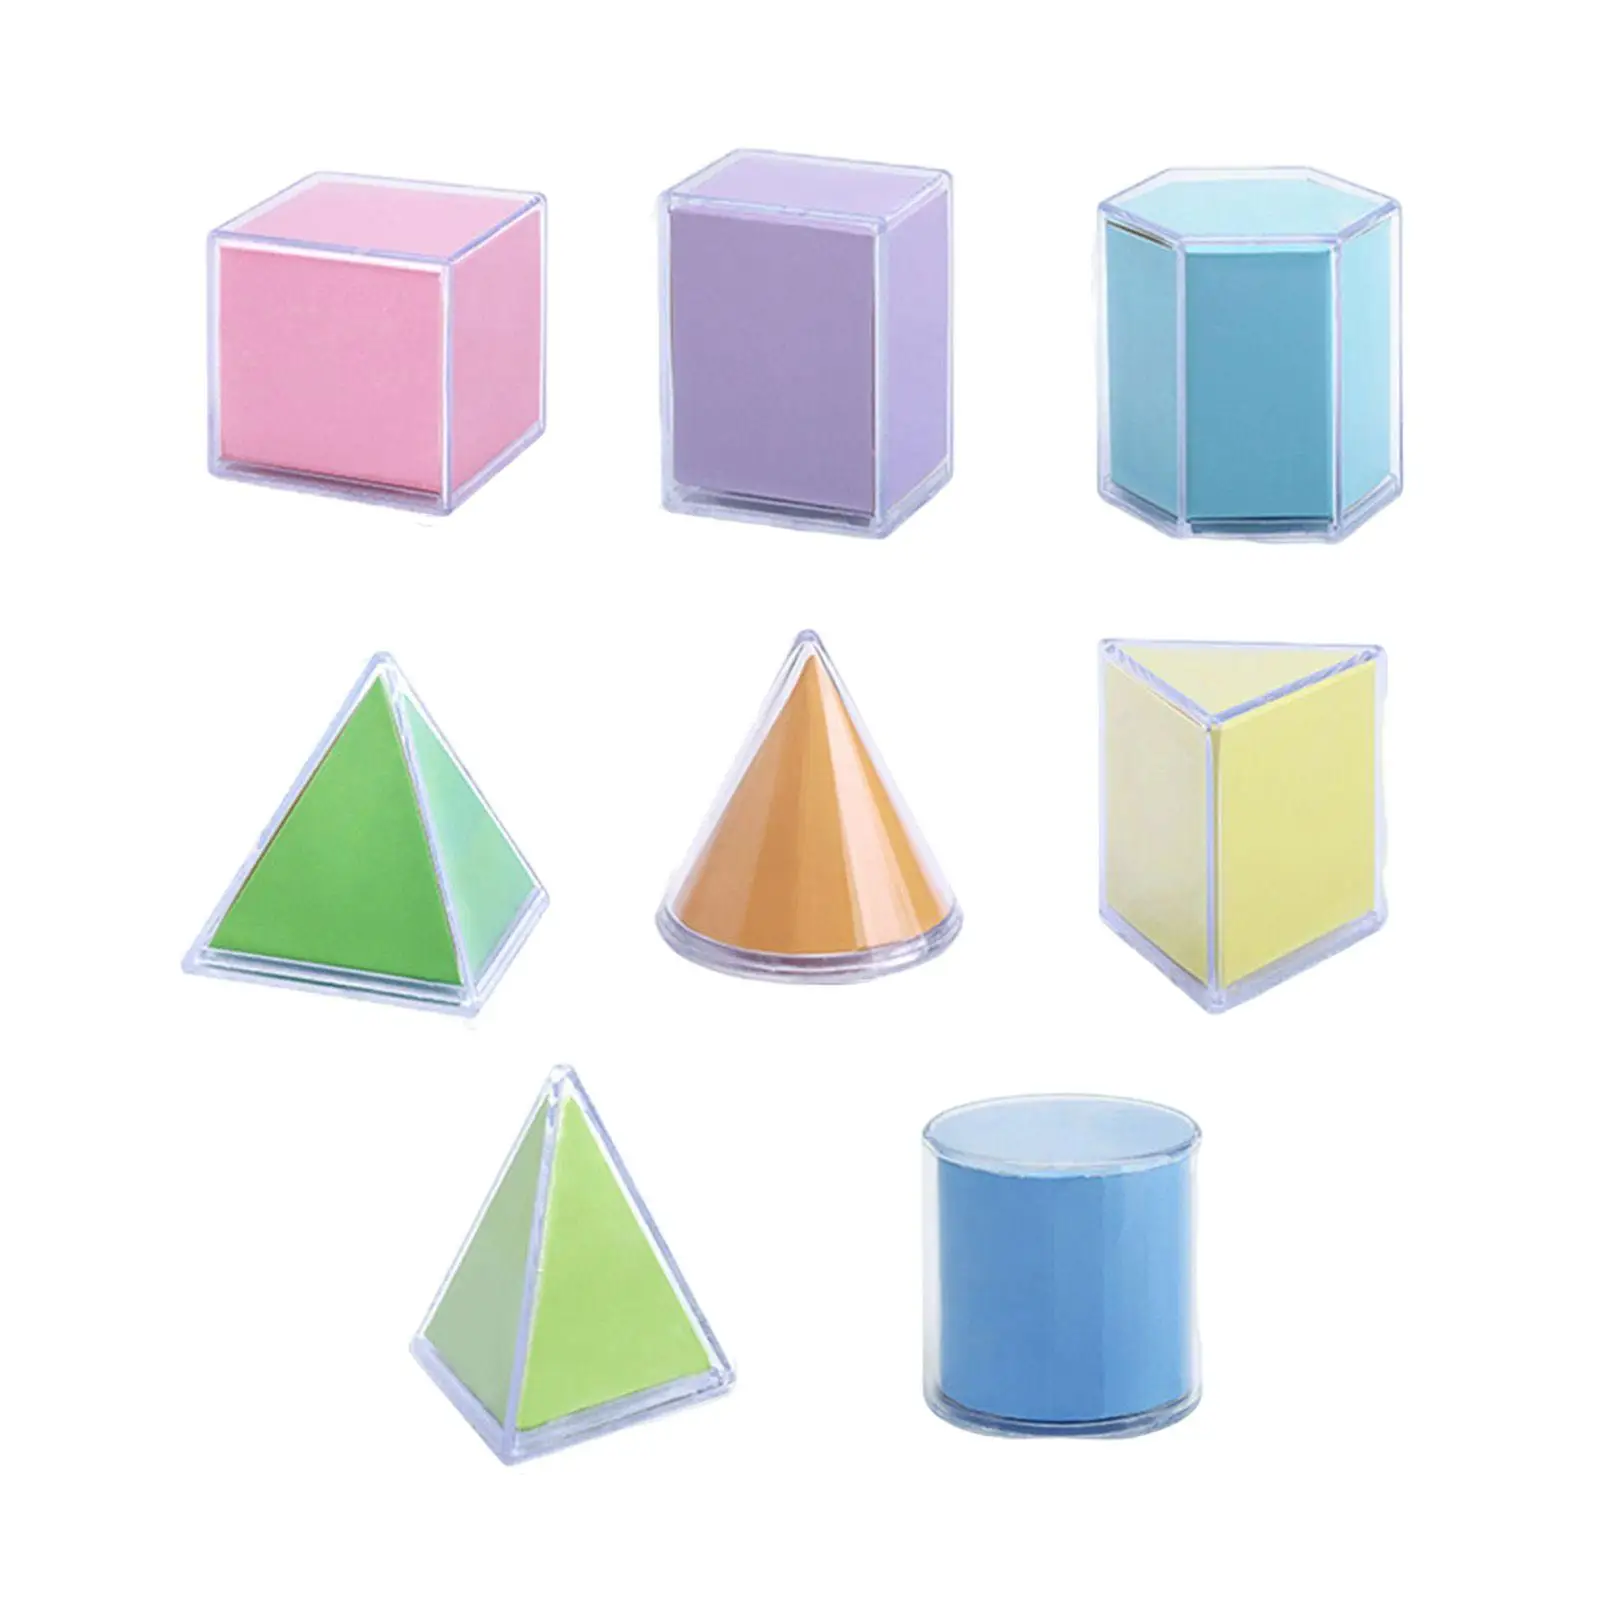 8x Transparent Geometric Shapes Blocks Montessori Toys Stacking Game Educational Toy Math Toys for Kids Babies Ages 2+ Toddler